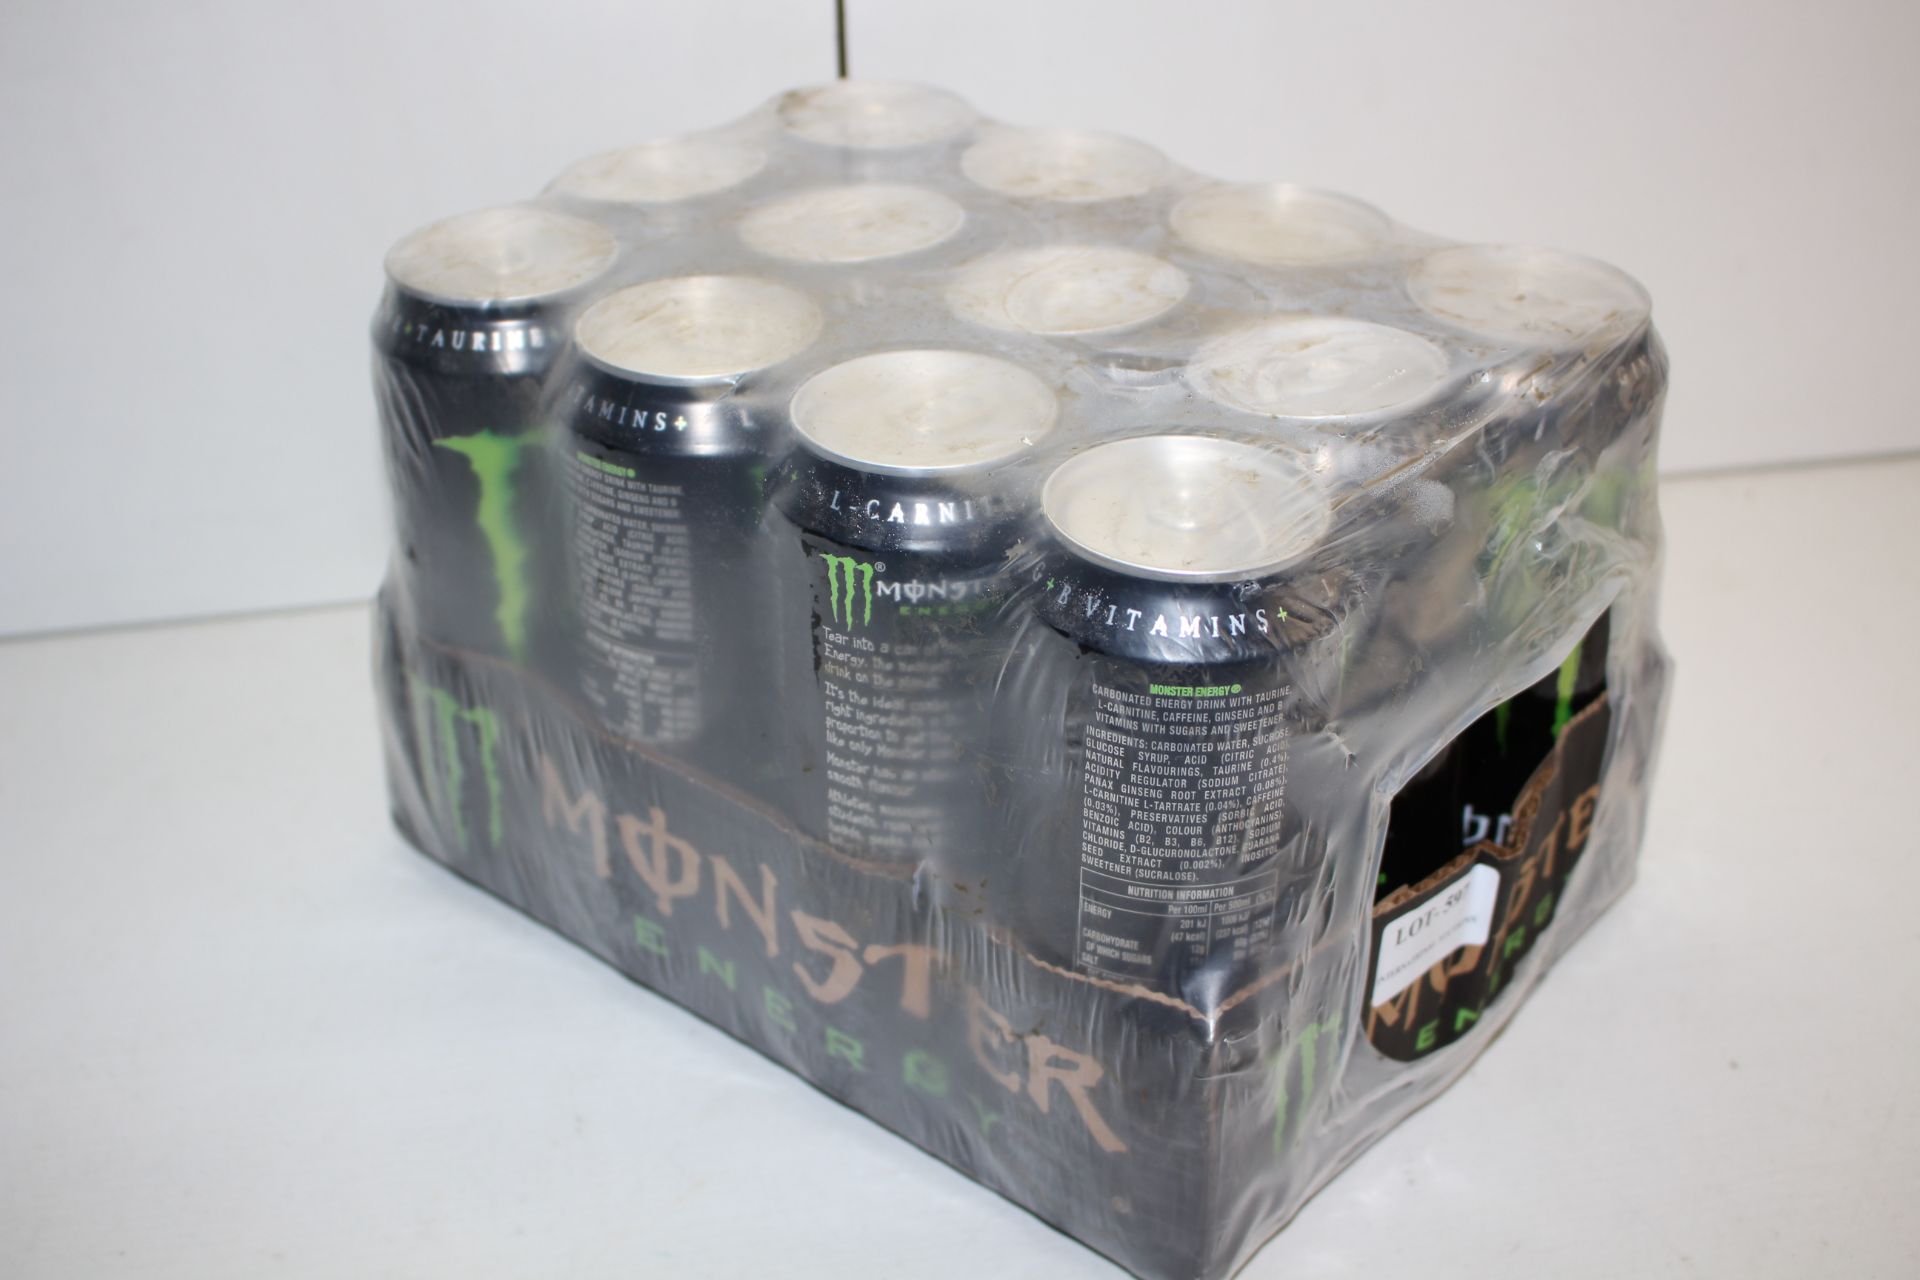 X 12 LARGE CANS OF MONSTER ENERGY DRINKSCondition ReportAppraisal Available on Request- All Items